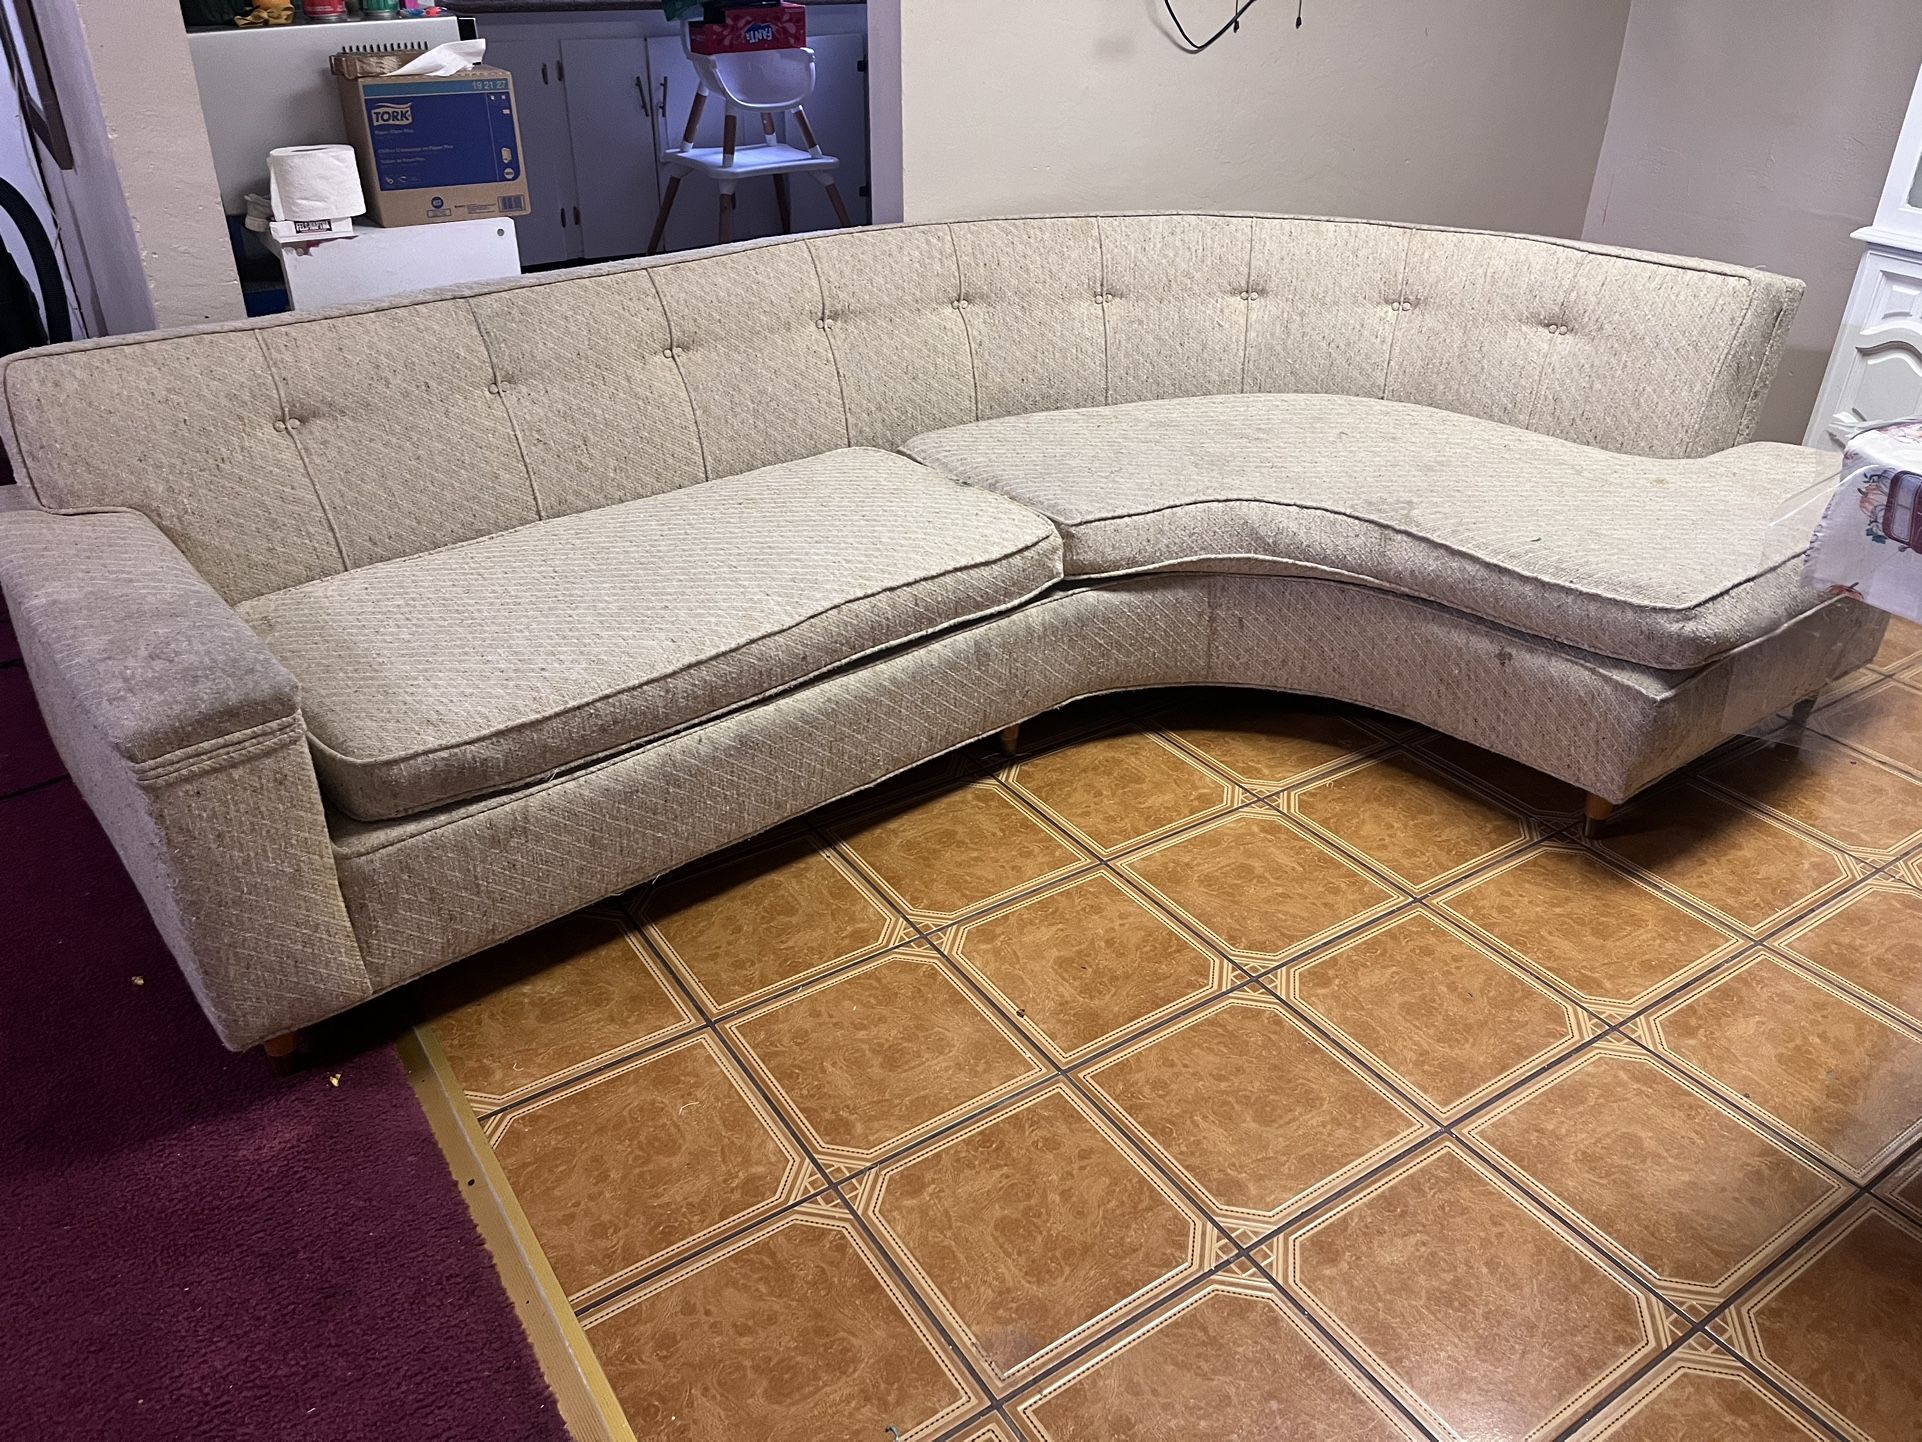 Vintage Couch 